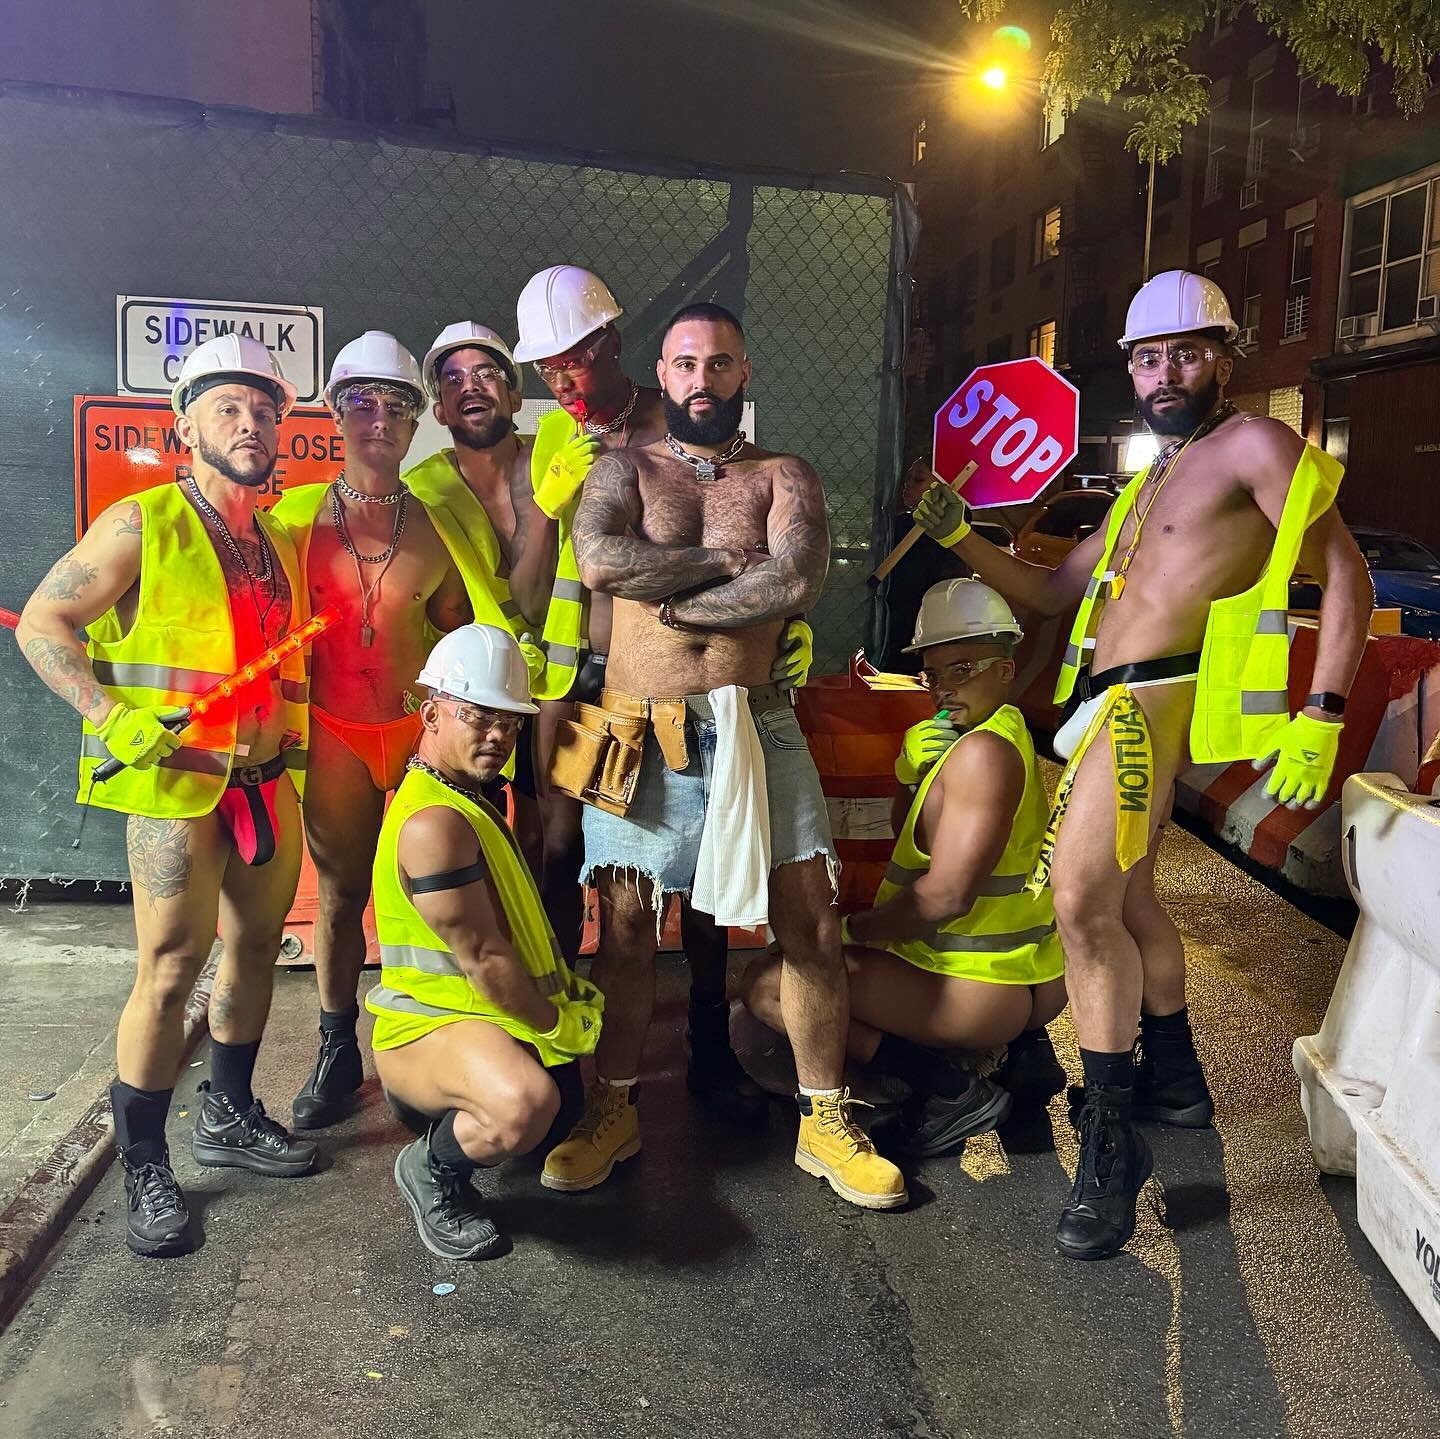 🚧 NSFW: WORK ZONE 🚧 
Every 2nd and 4th Friday
Only at @hushhkbar